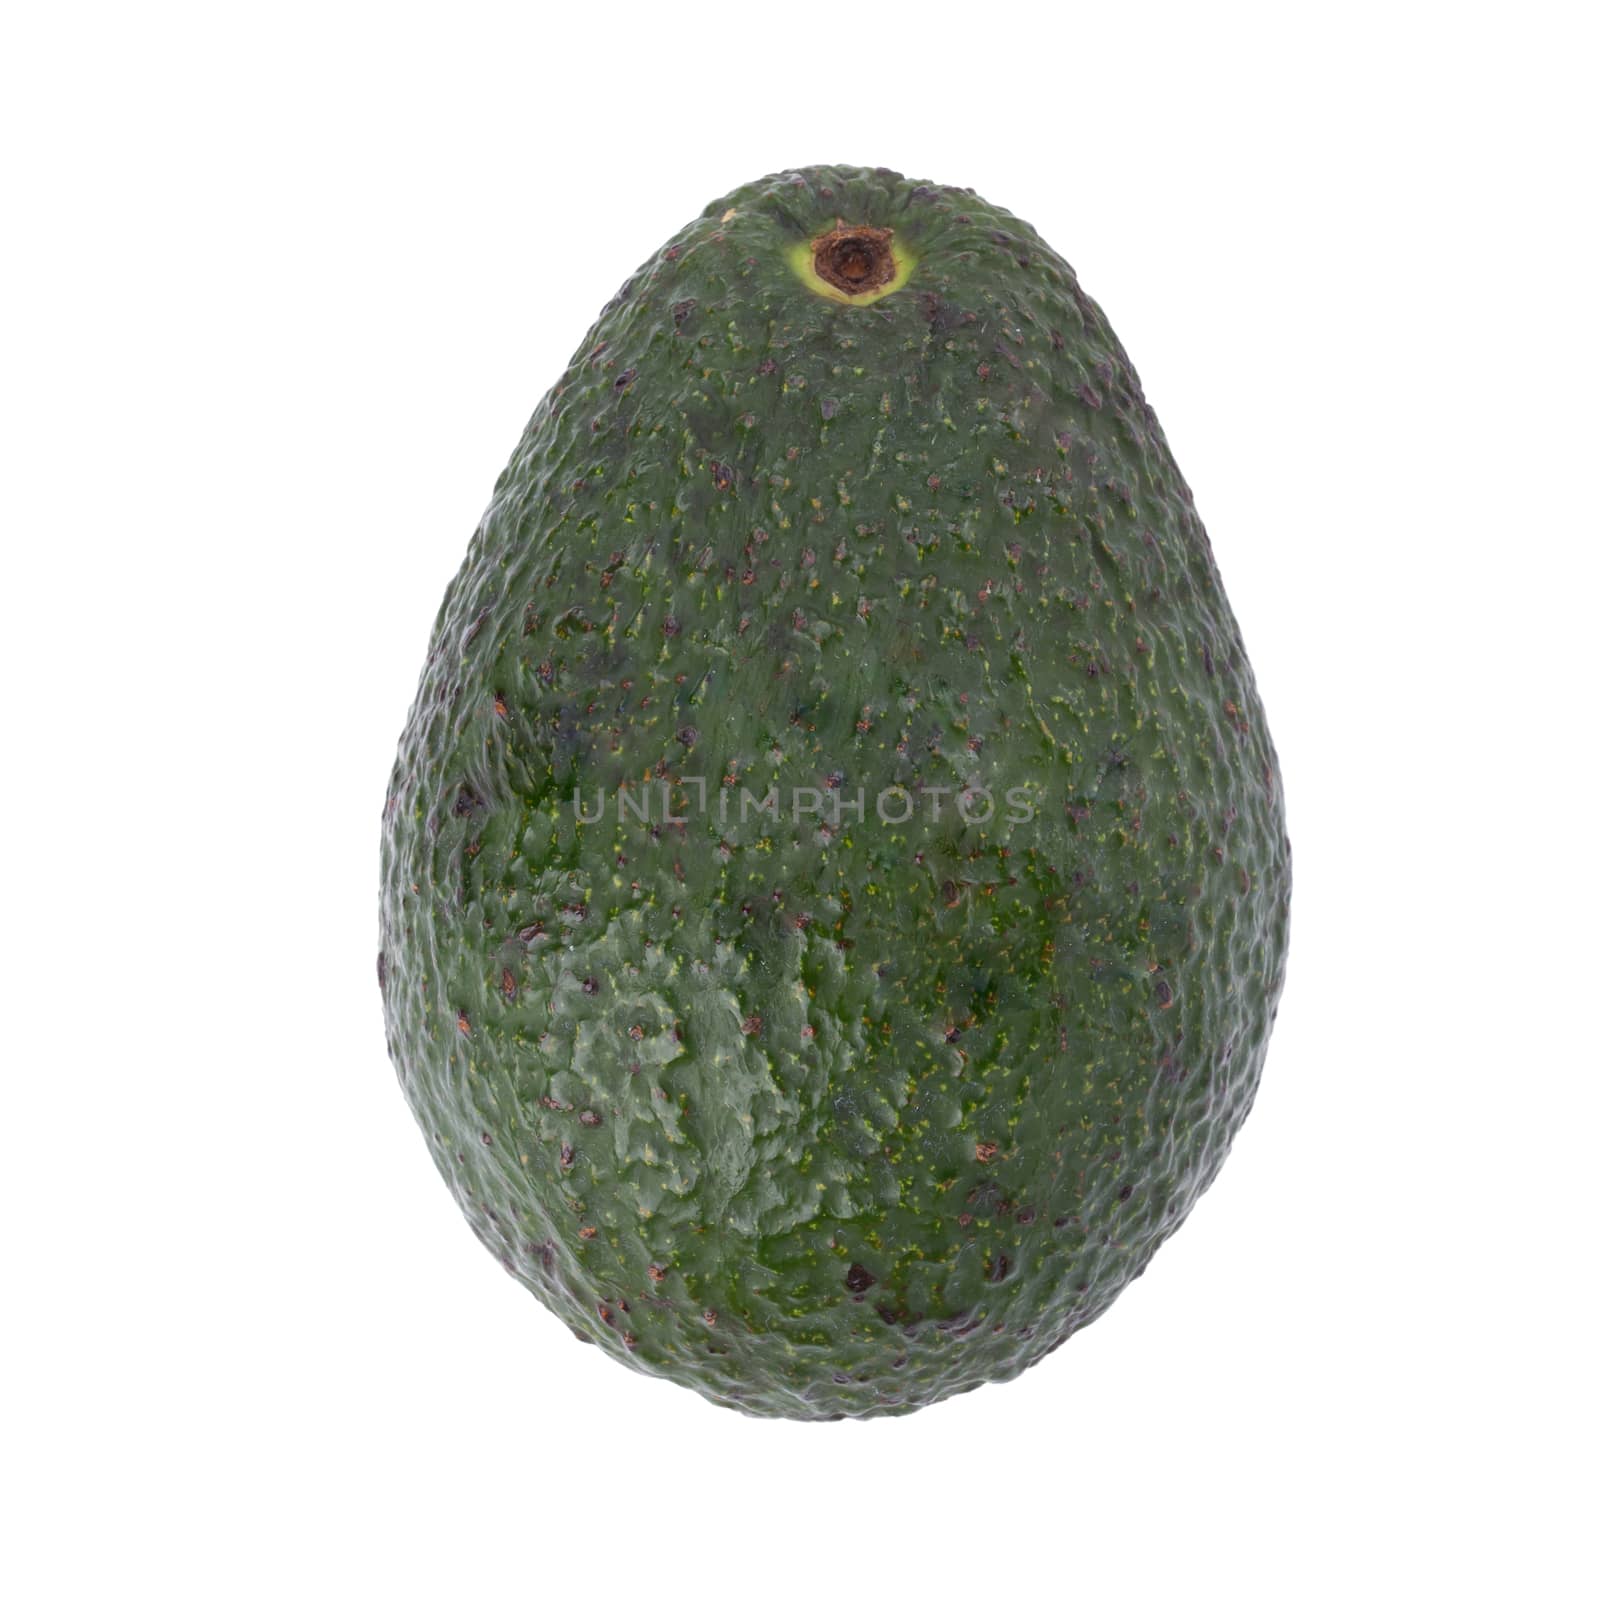 Green ripe avocado isolated on the white background by kaiskynet